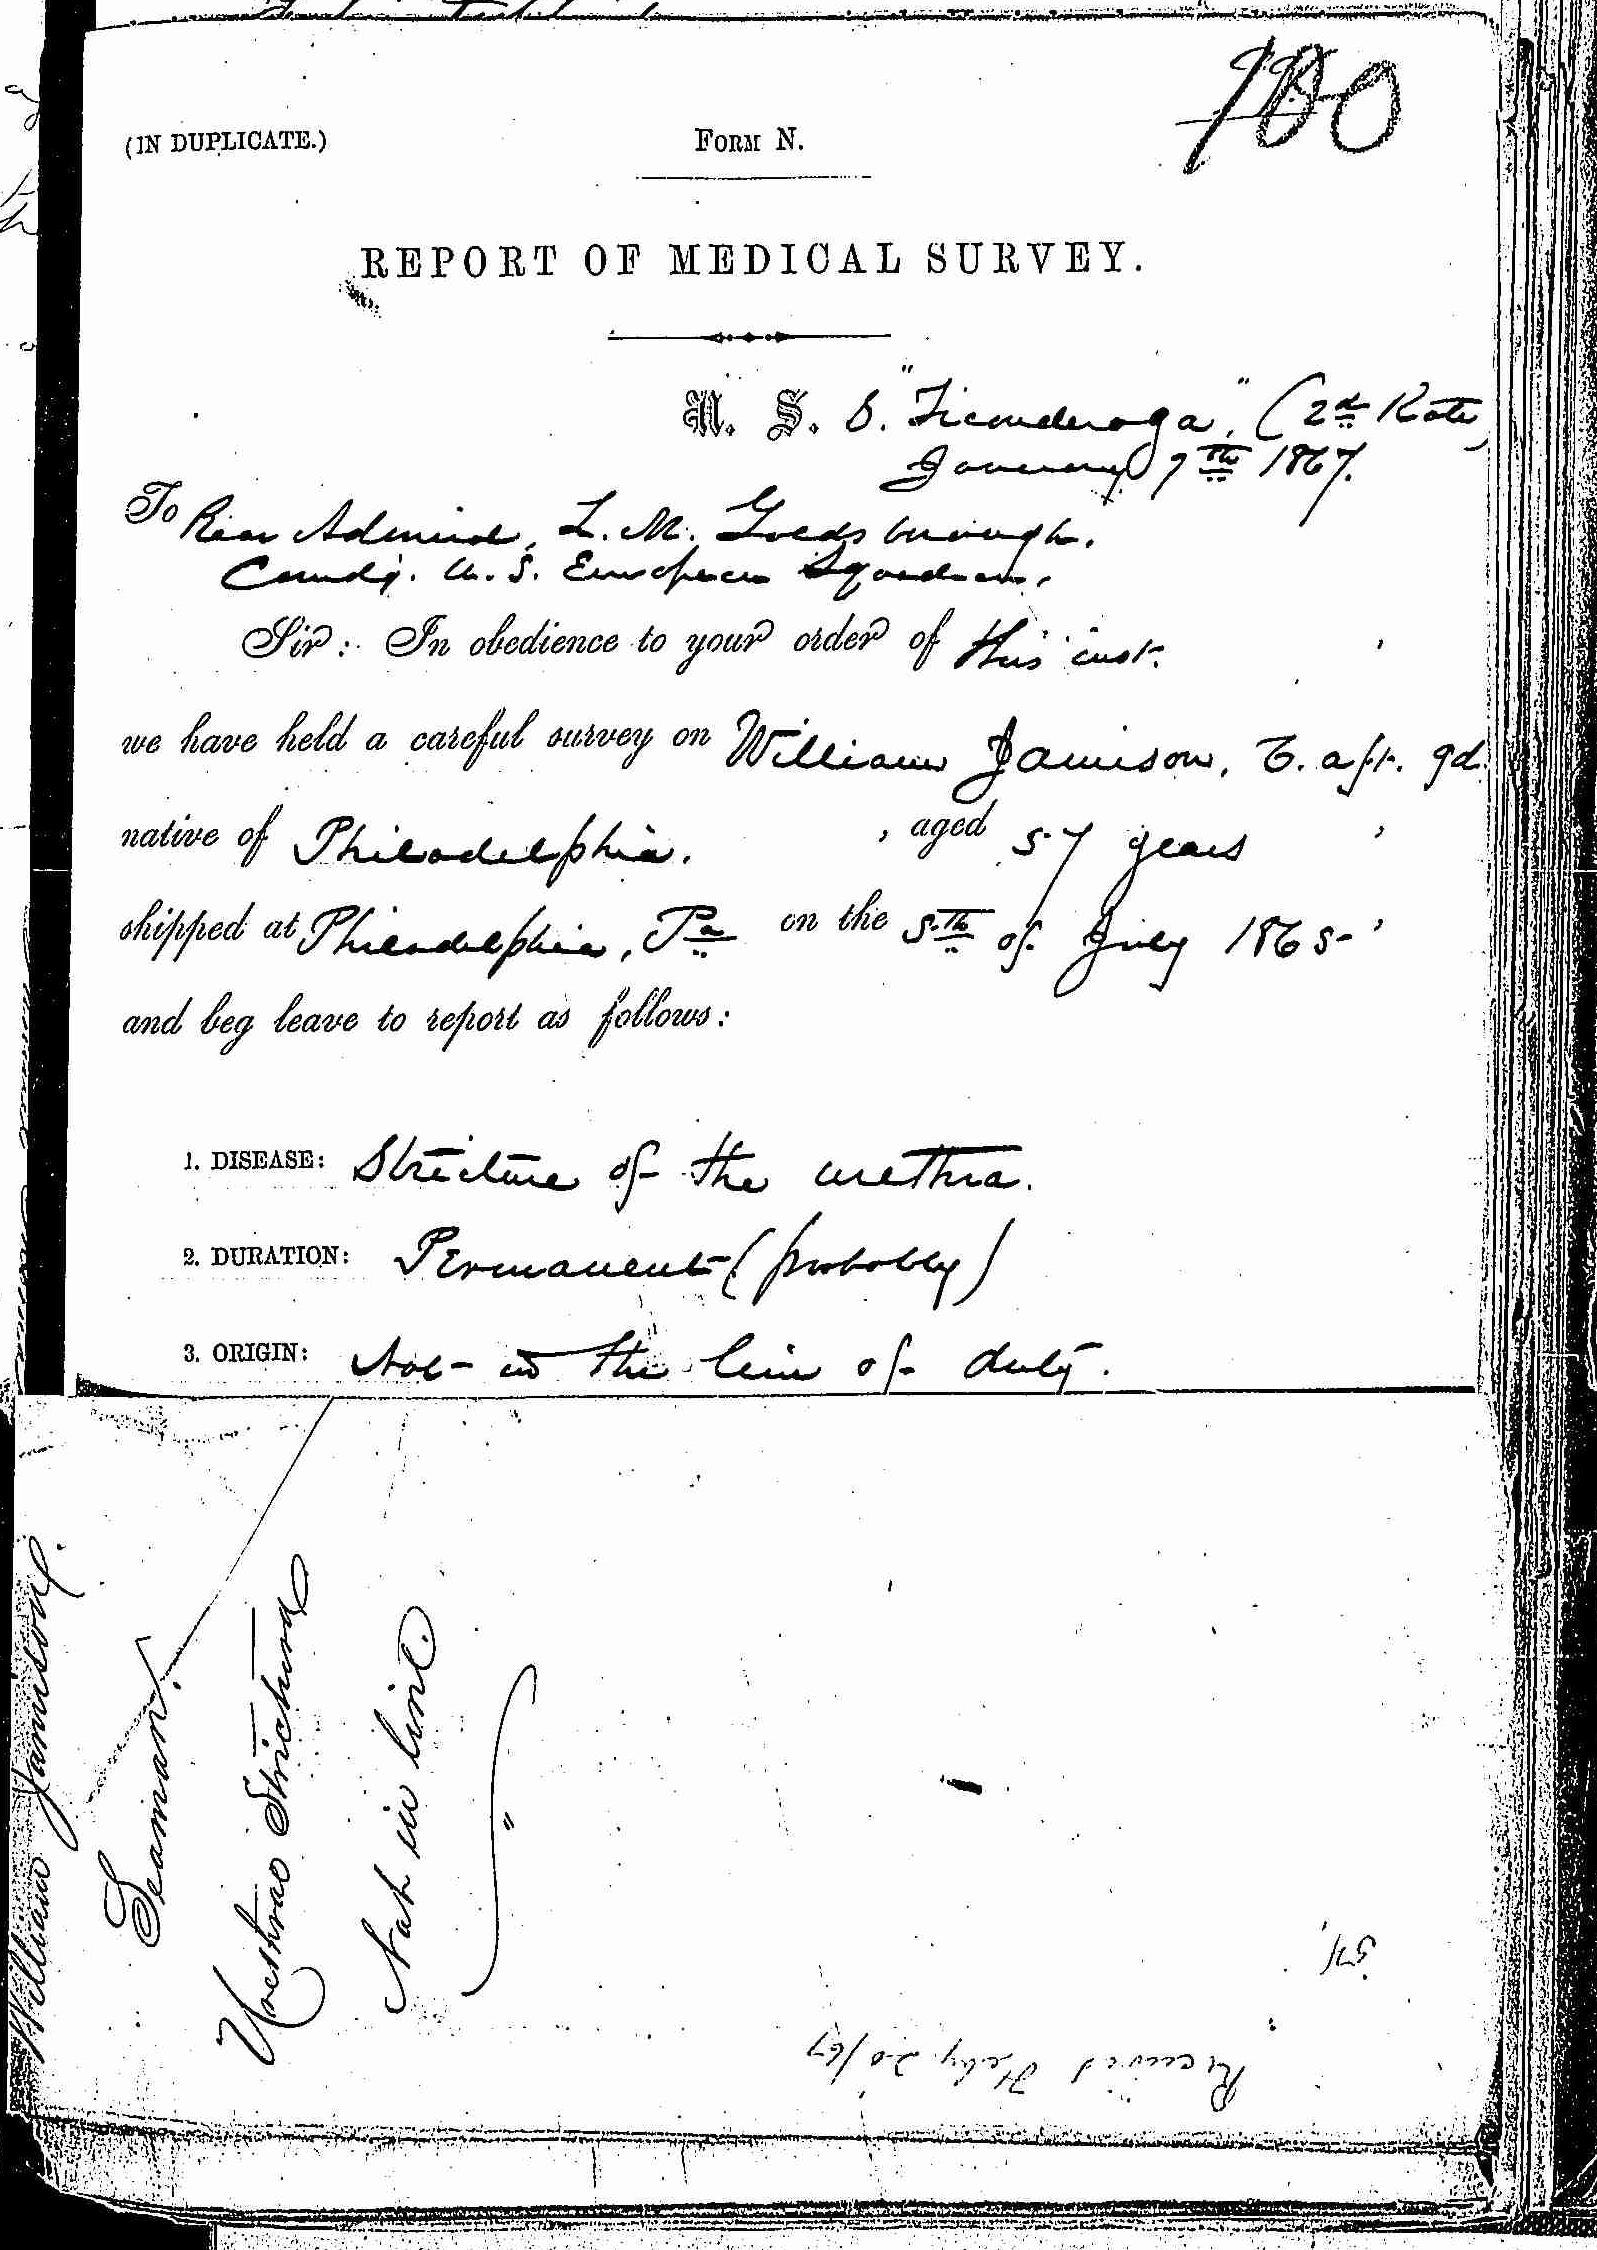 Entry for William Jamison (page 1 of 5) in the log Hospital Tickets and Case Papers - Naval Hospital - Washington, D.C. - 1866-68